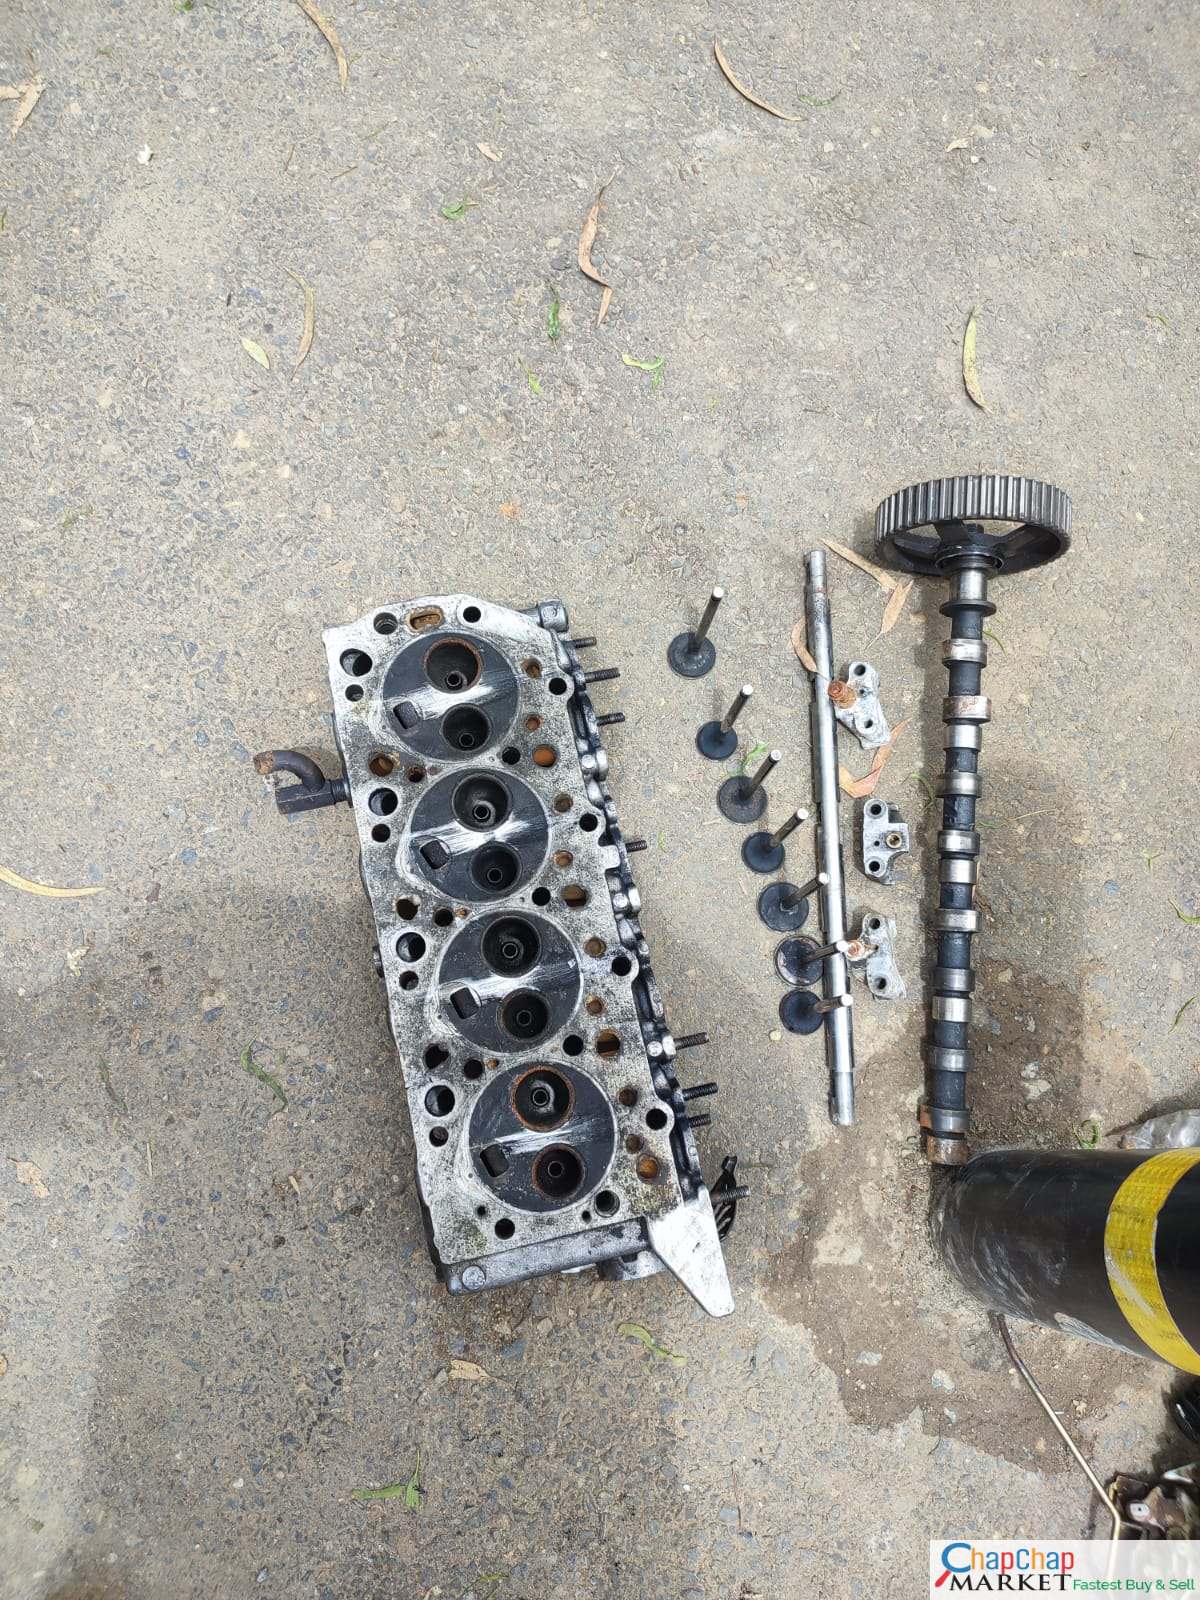 4d56 cylinder head for sale with nozzles, valves, camshaft  and brackets  2) Front axles for Pajero generation 2  Everything for ONLY 50K